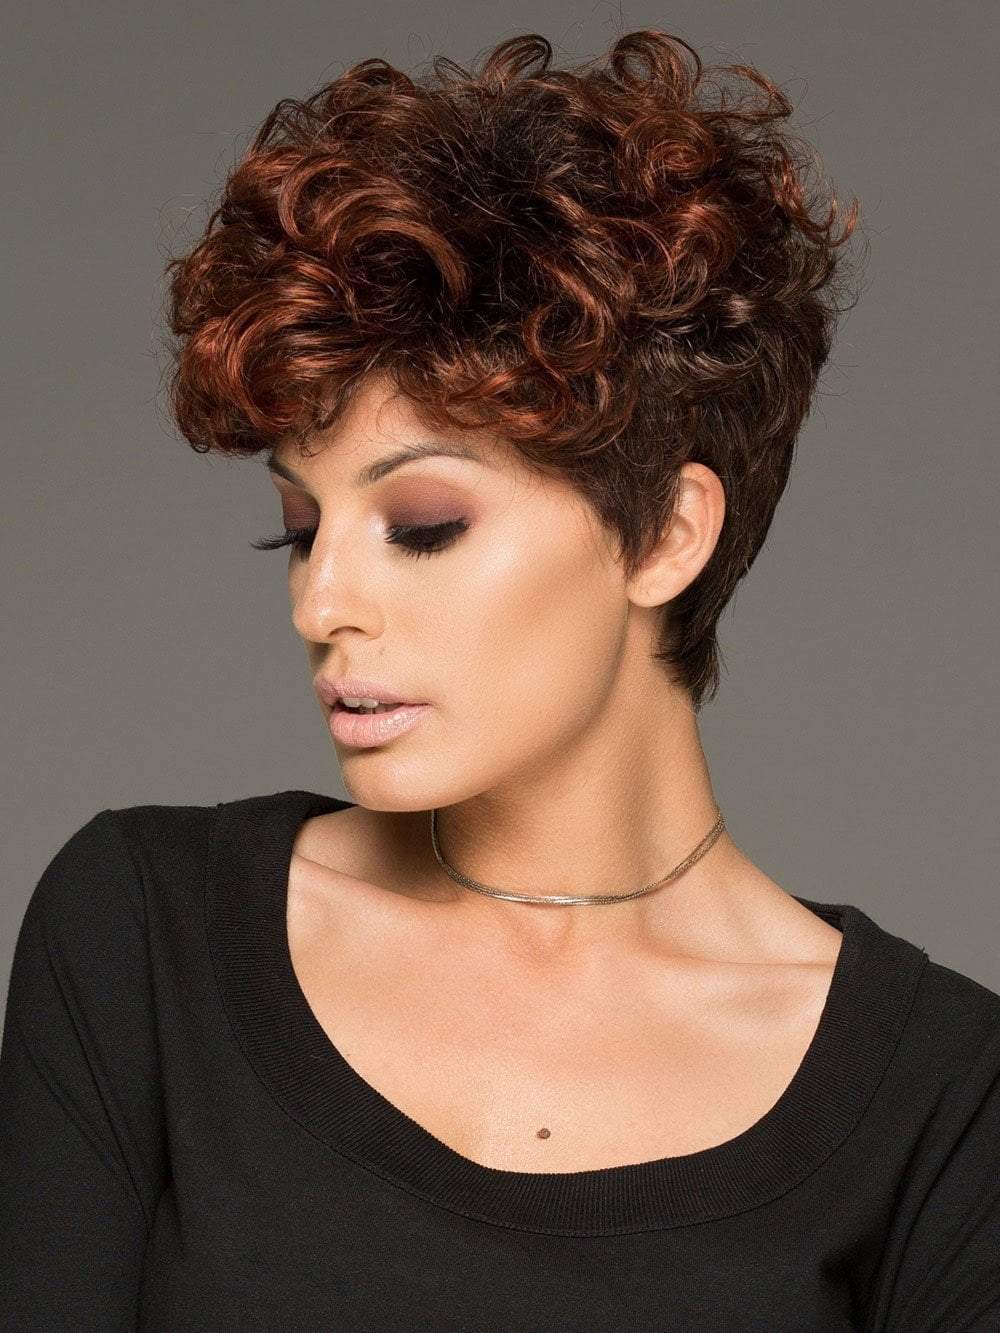 The side bang can be cut or trimmed by your stylist. The layered curl provides full coverage along the hairline